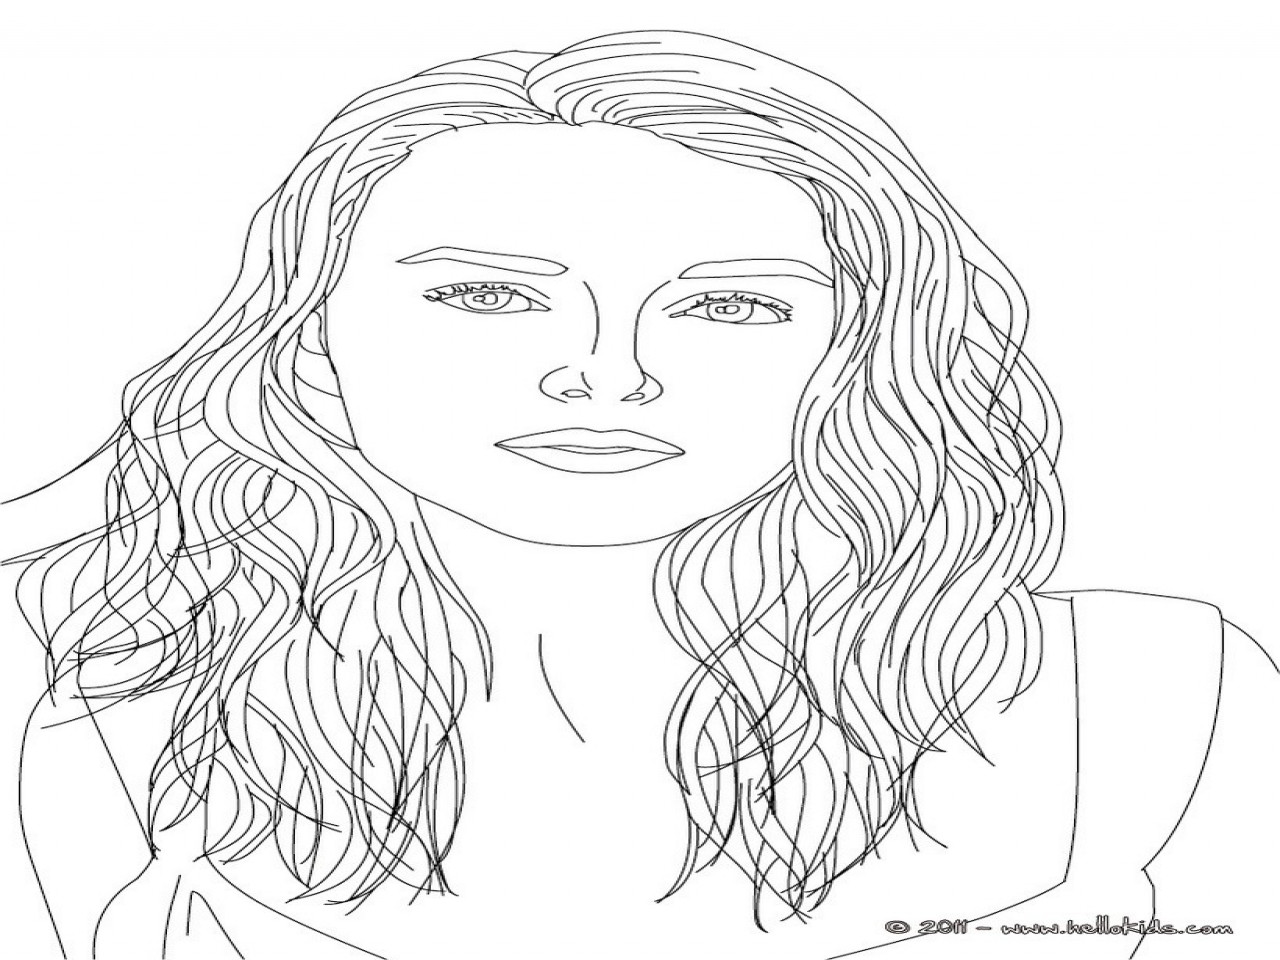 The 20 Best Ideas for People Coloring Pages for Adults - Best ...